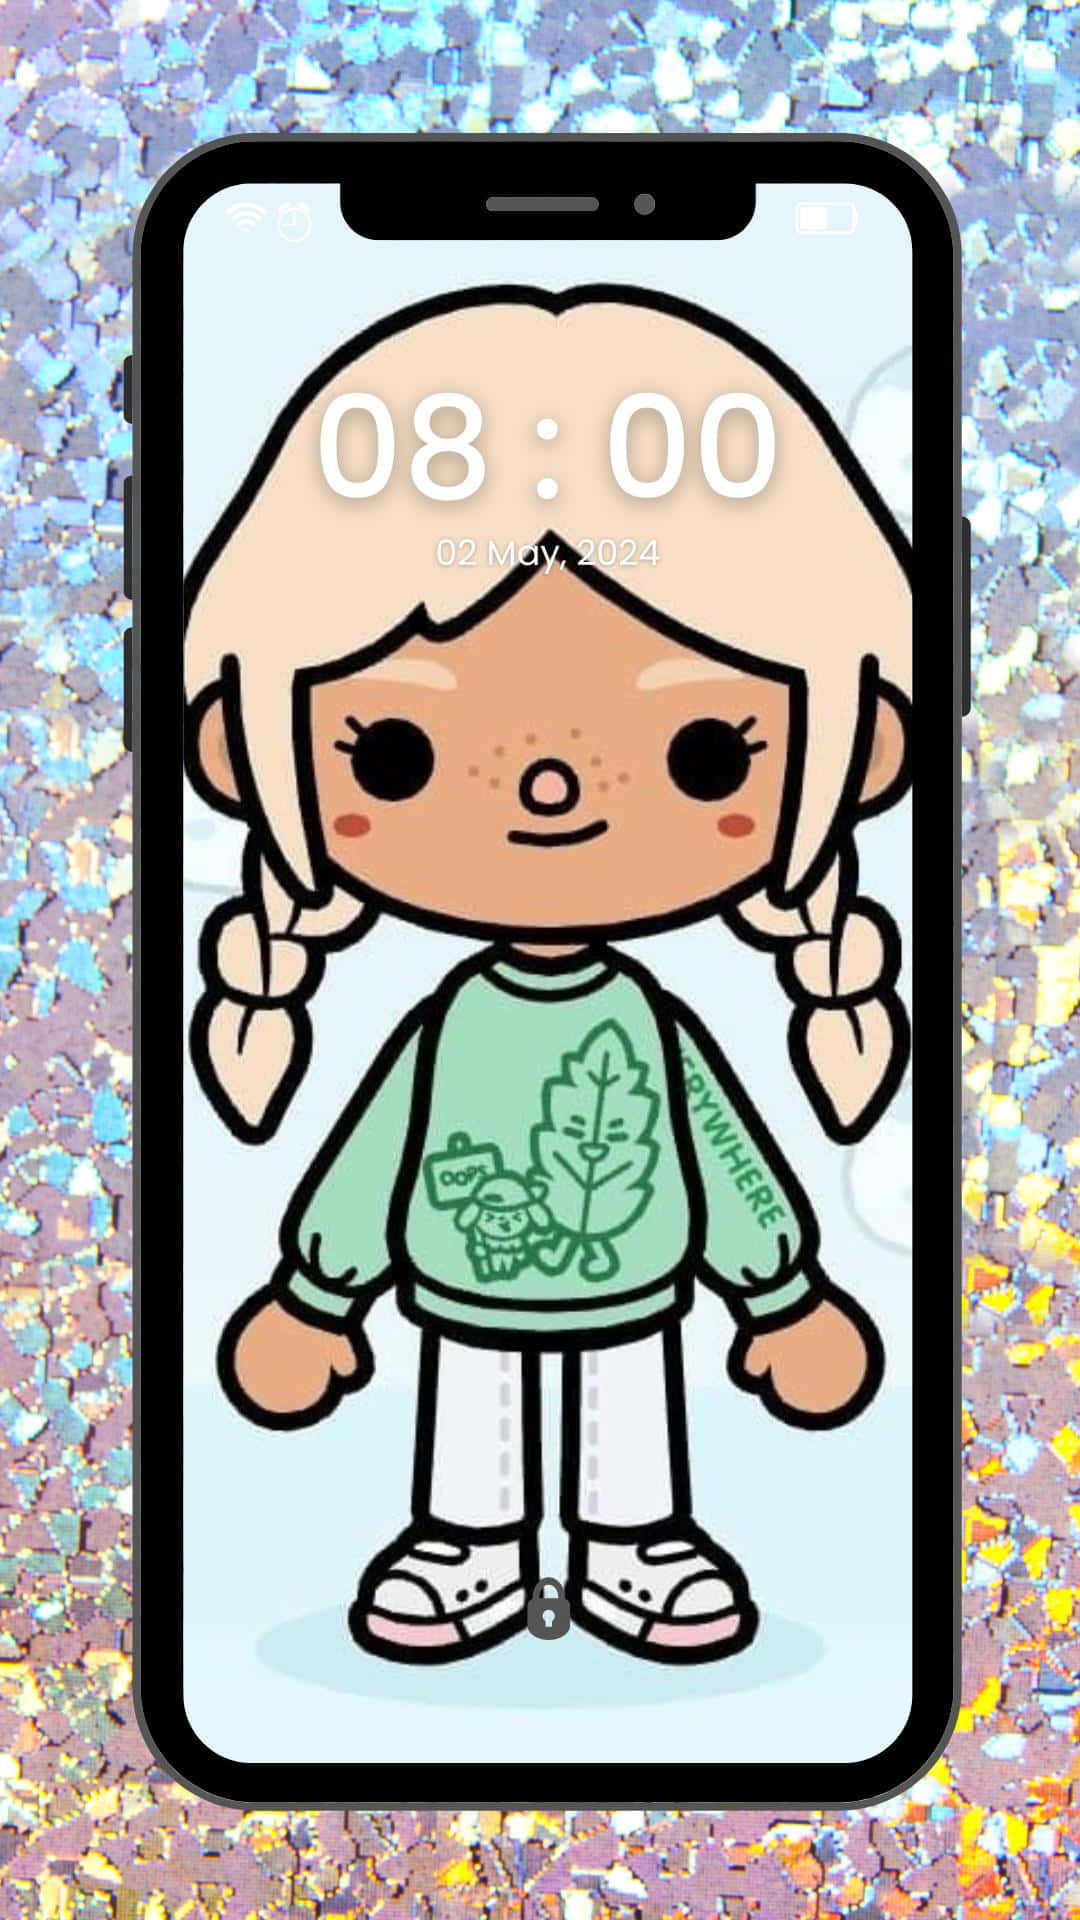 A Cartoon Girl Is Standing On A Phone Screen